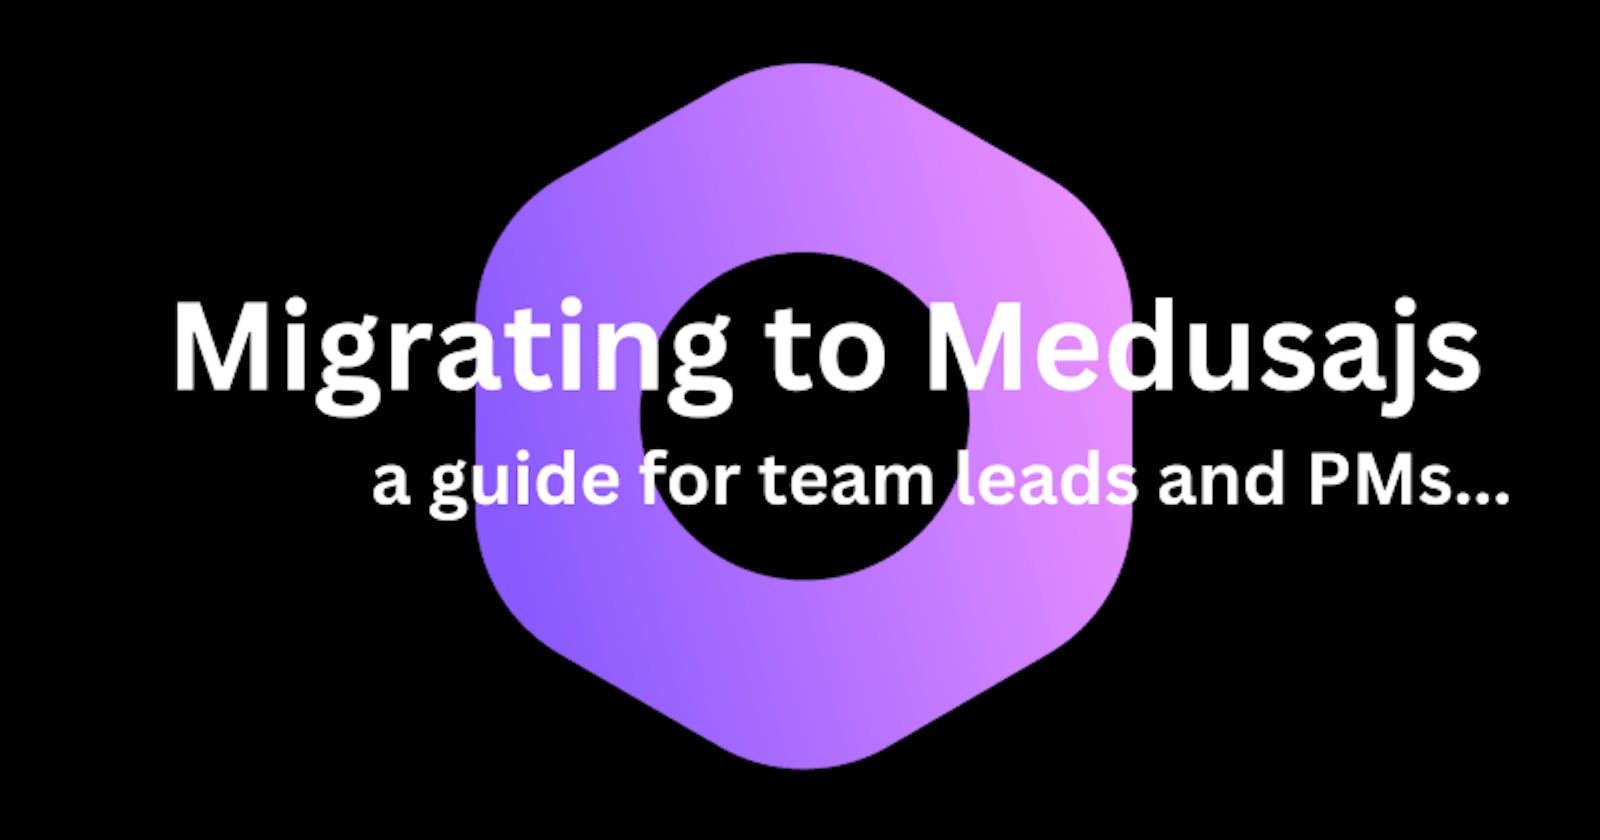 Migrating from Monolithic E-commerce Platforms to MedusaJS: A Guide for Team Leads and Project managers